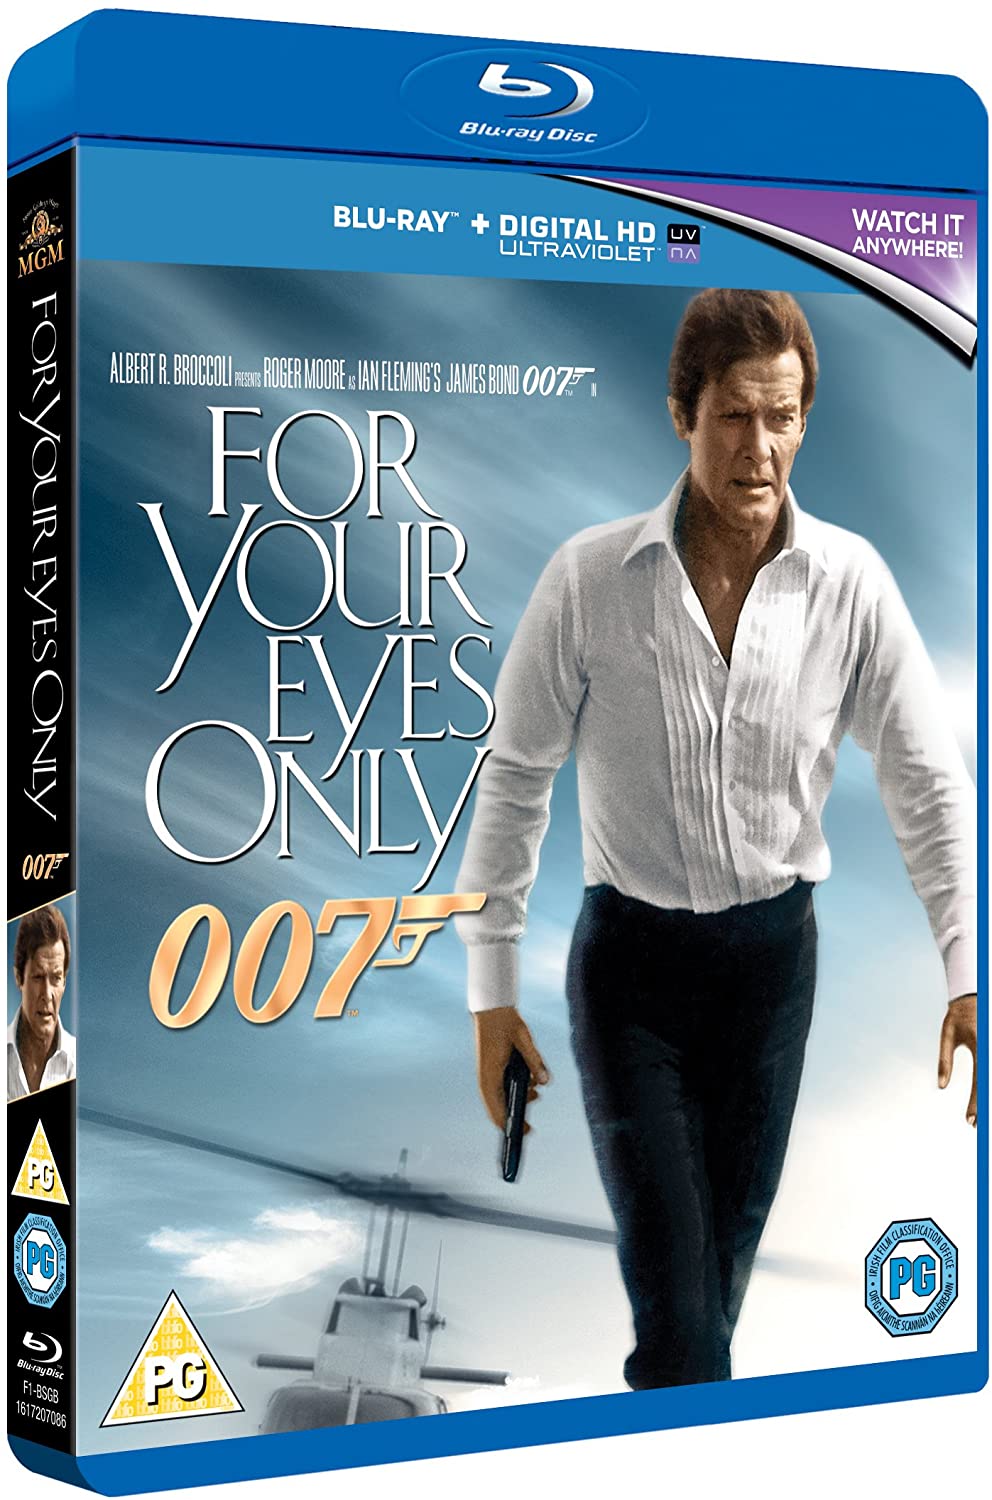 For your eyes only [Blu-ray] [1981]